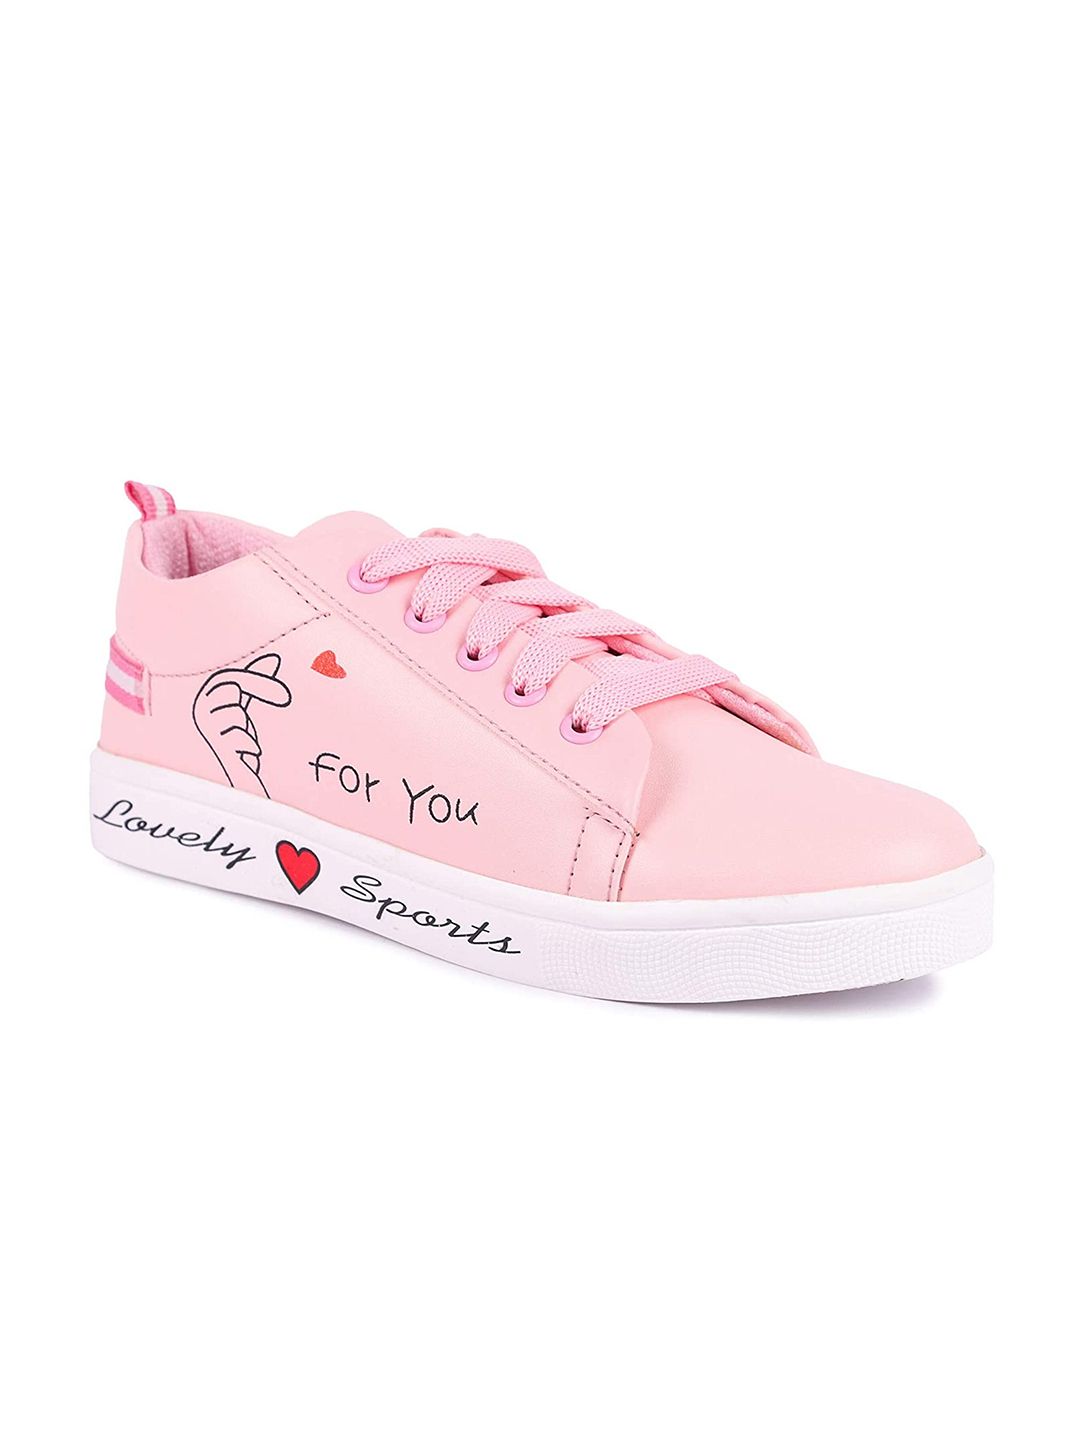 BEONZA Women Pink Printed Sneakers Price in India